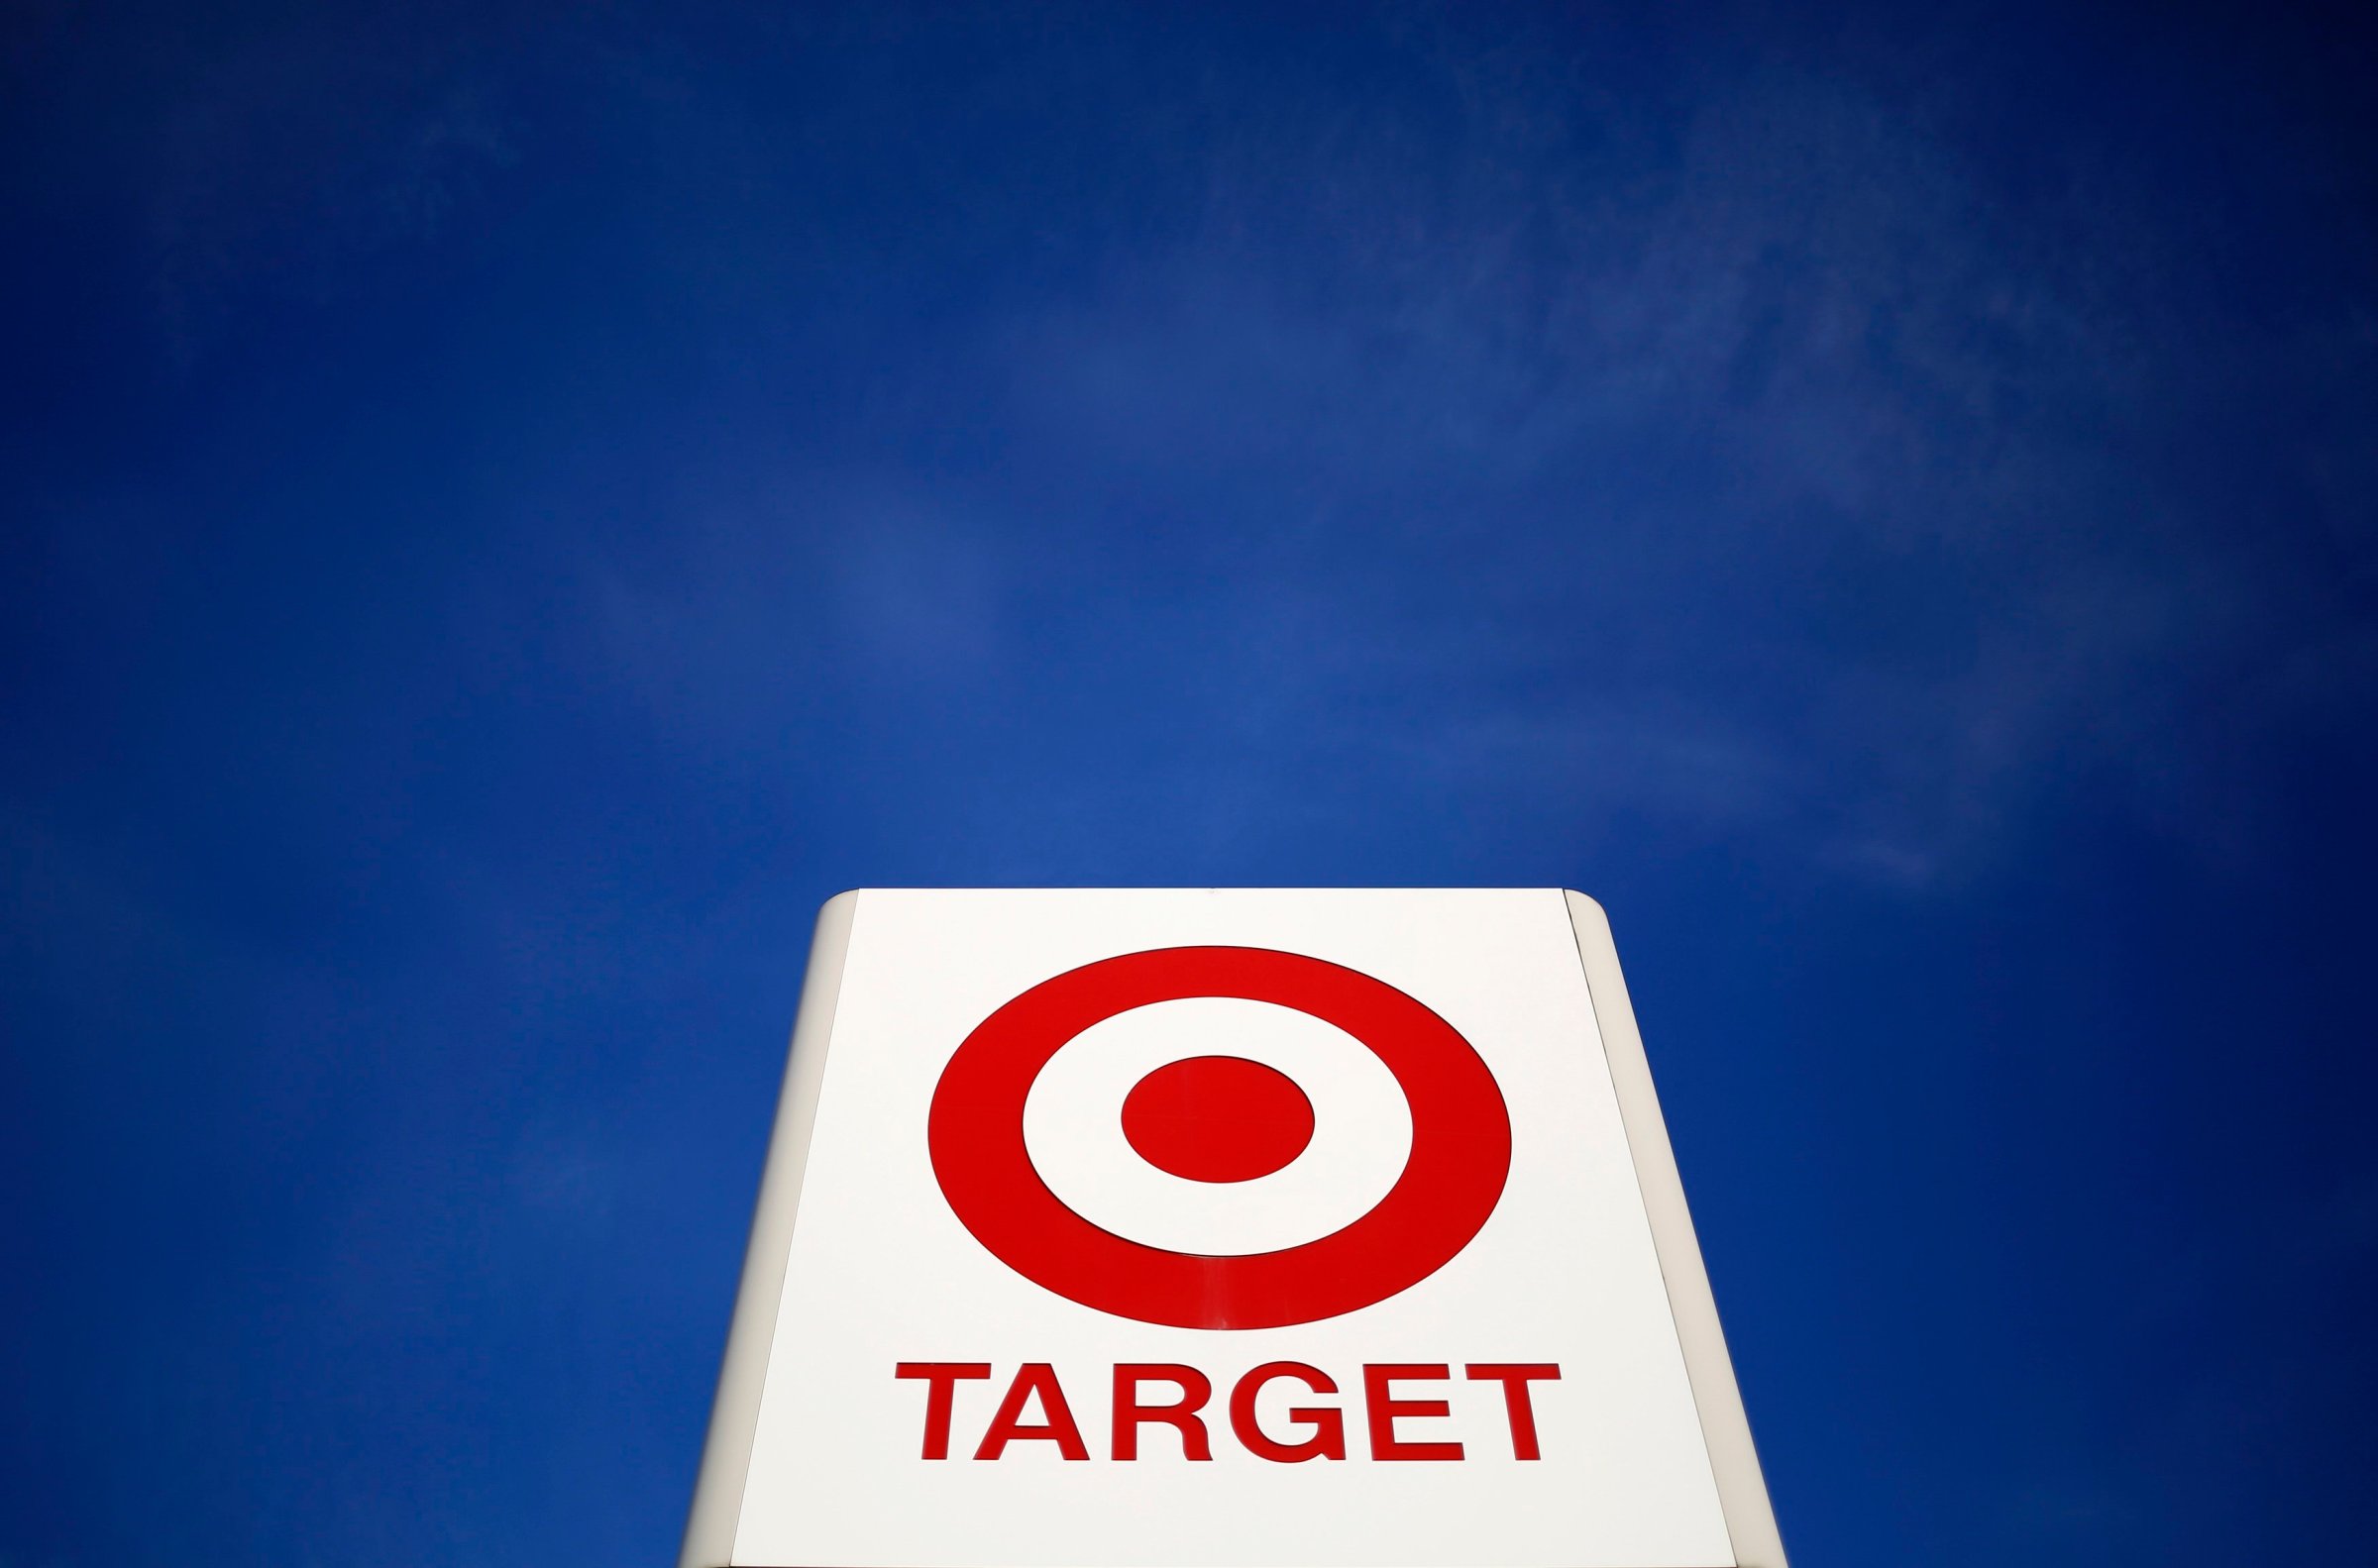 A sign for a Target store is seen in the Chicago suburb of Evanston, Illinois on Feb. 10, 2015.